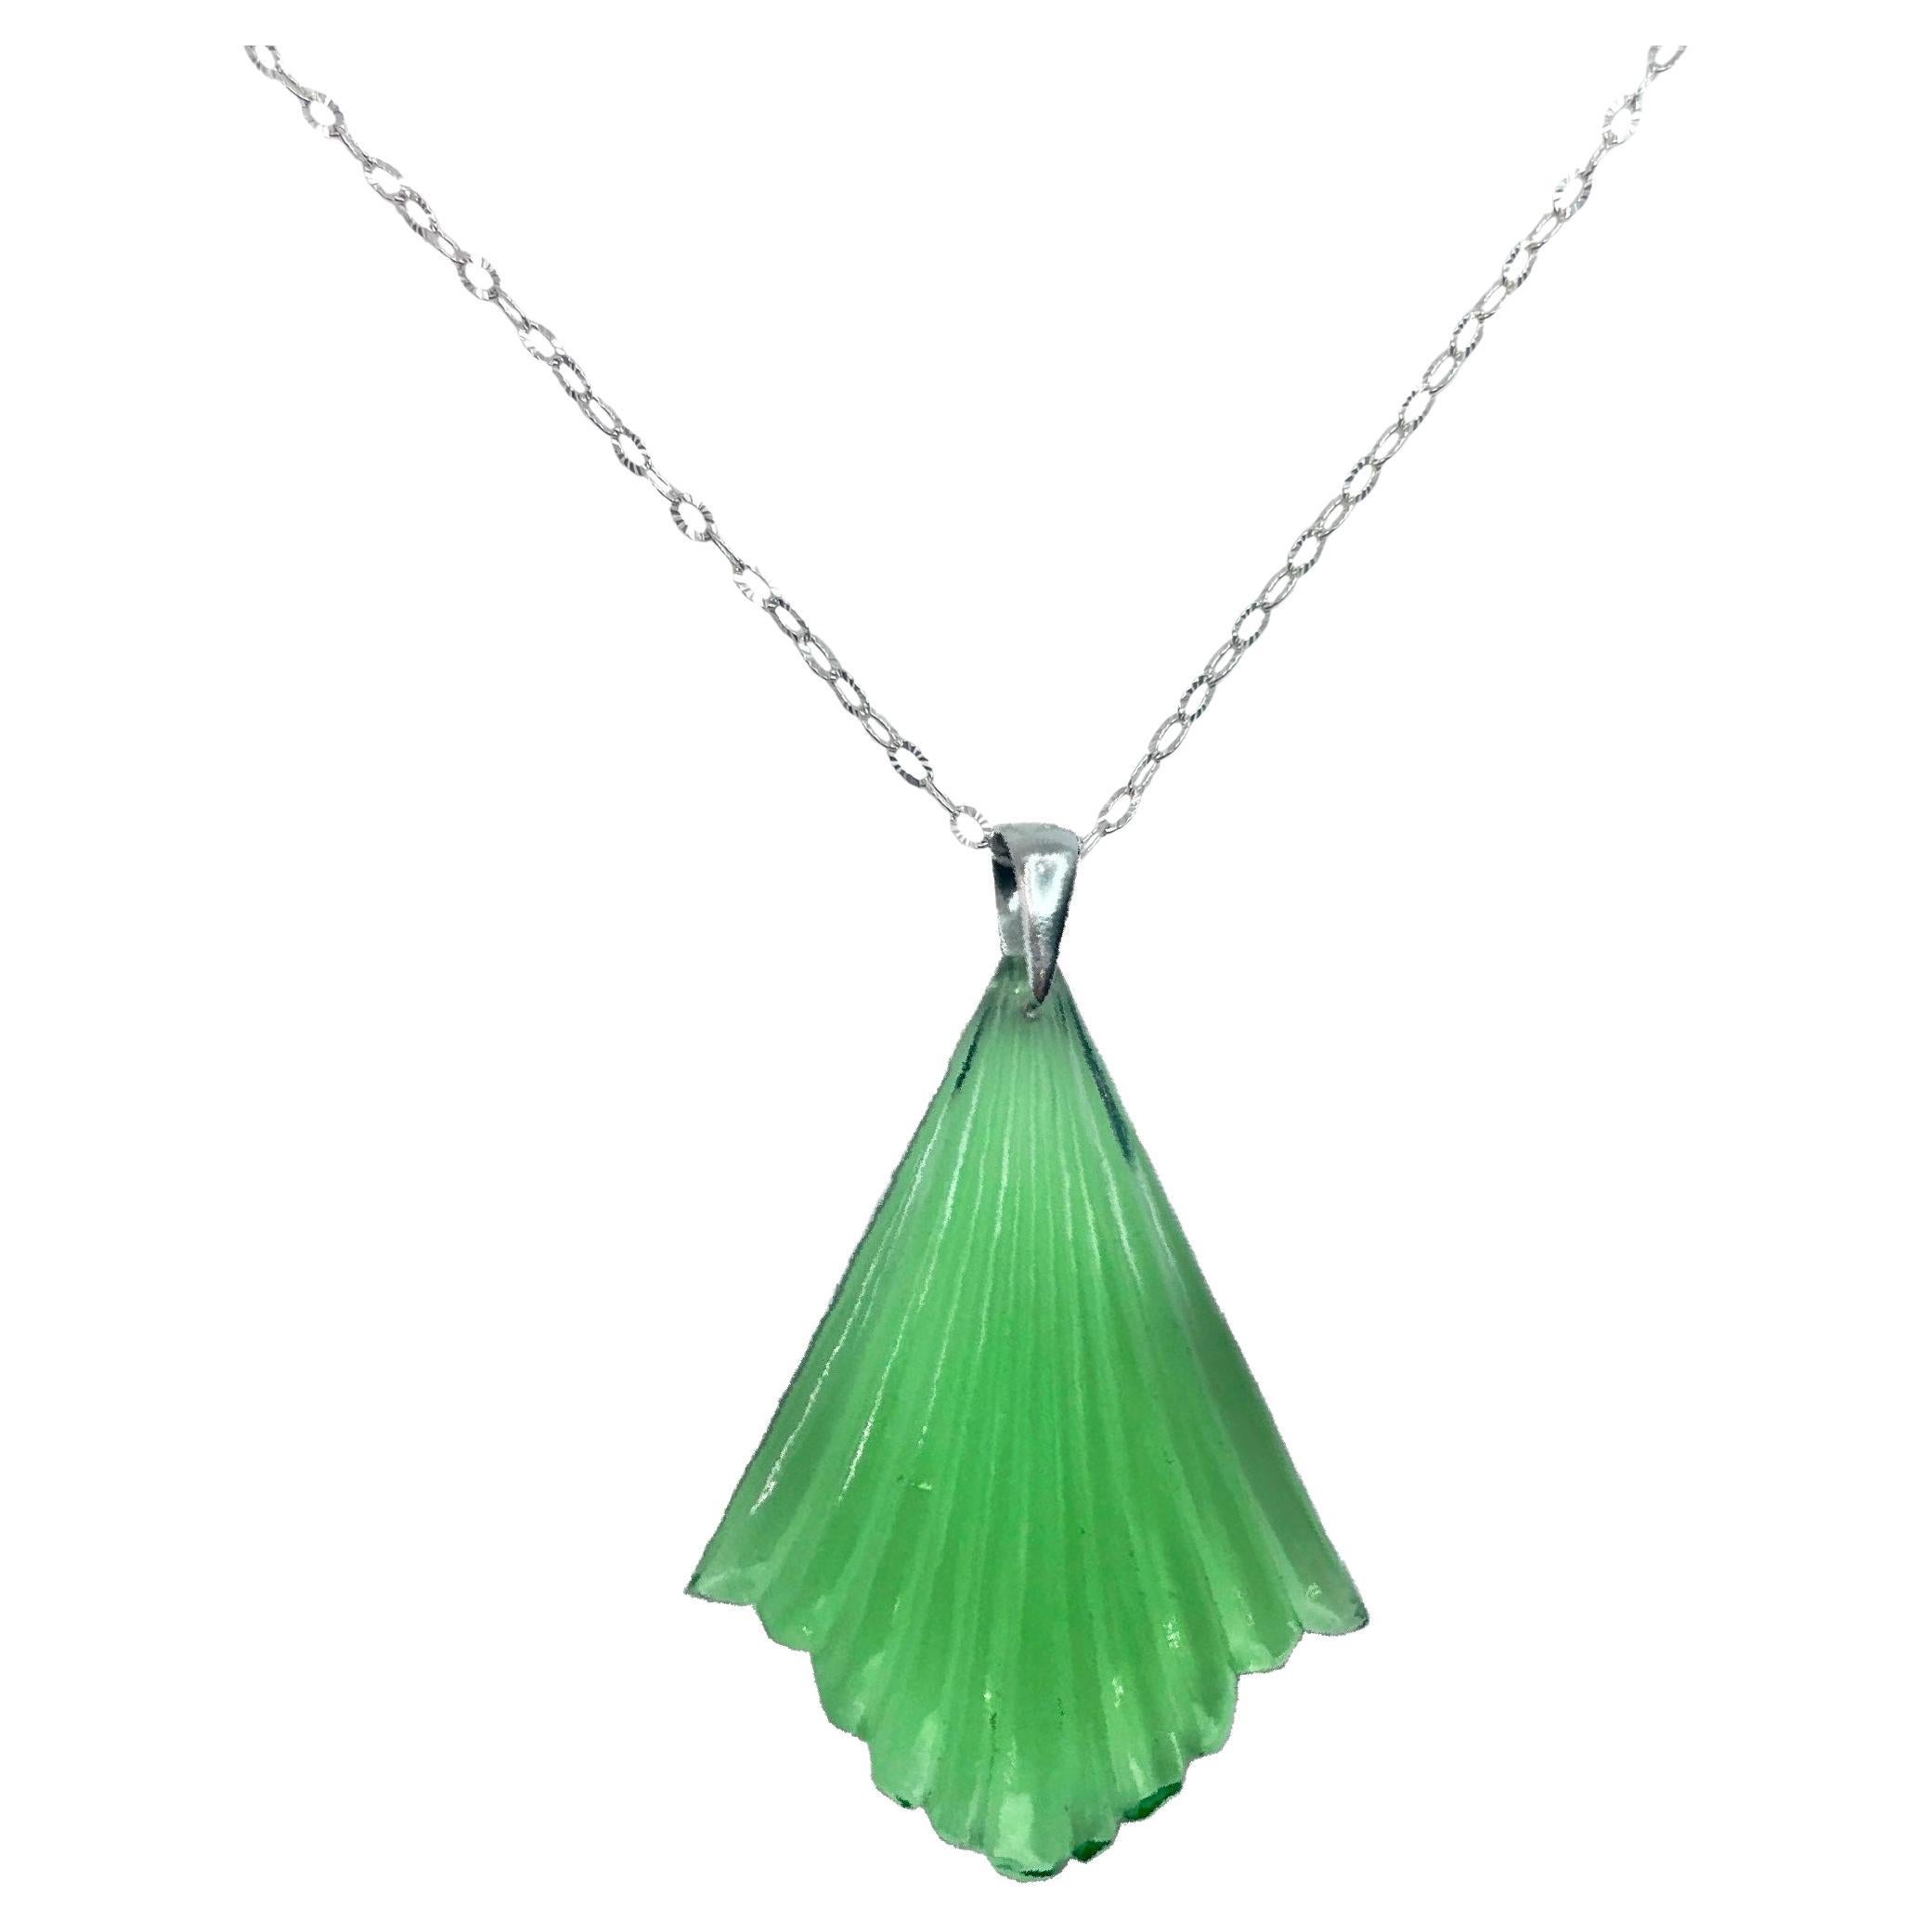 PONTIEL Art Deco Green Glass Fan with Sterling Silver Chain Pendant Necklace For Sale